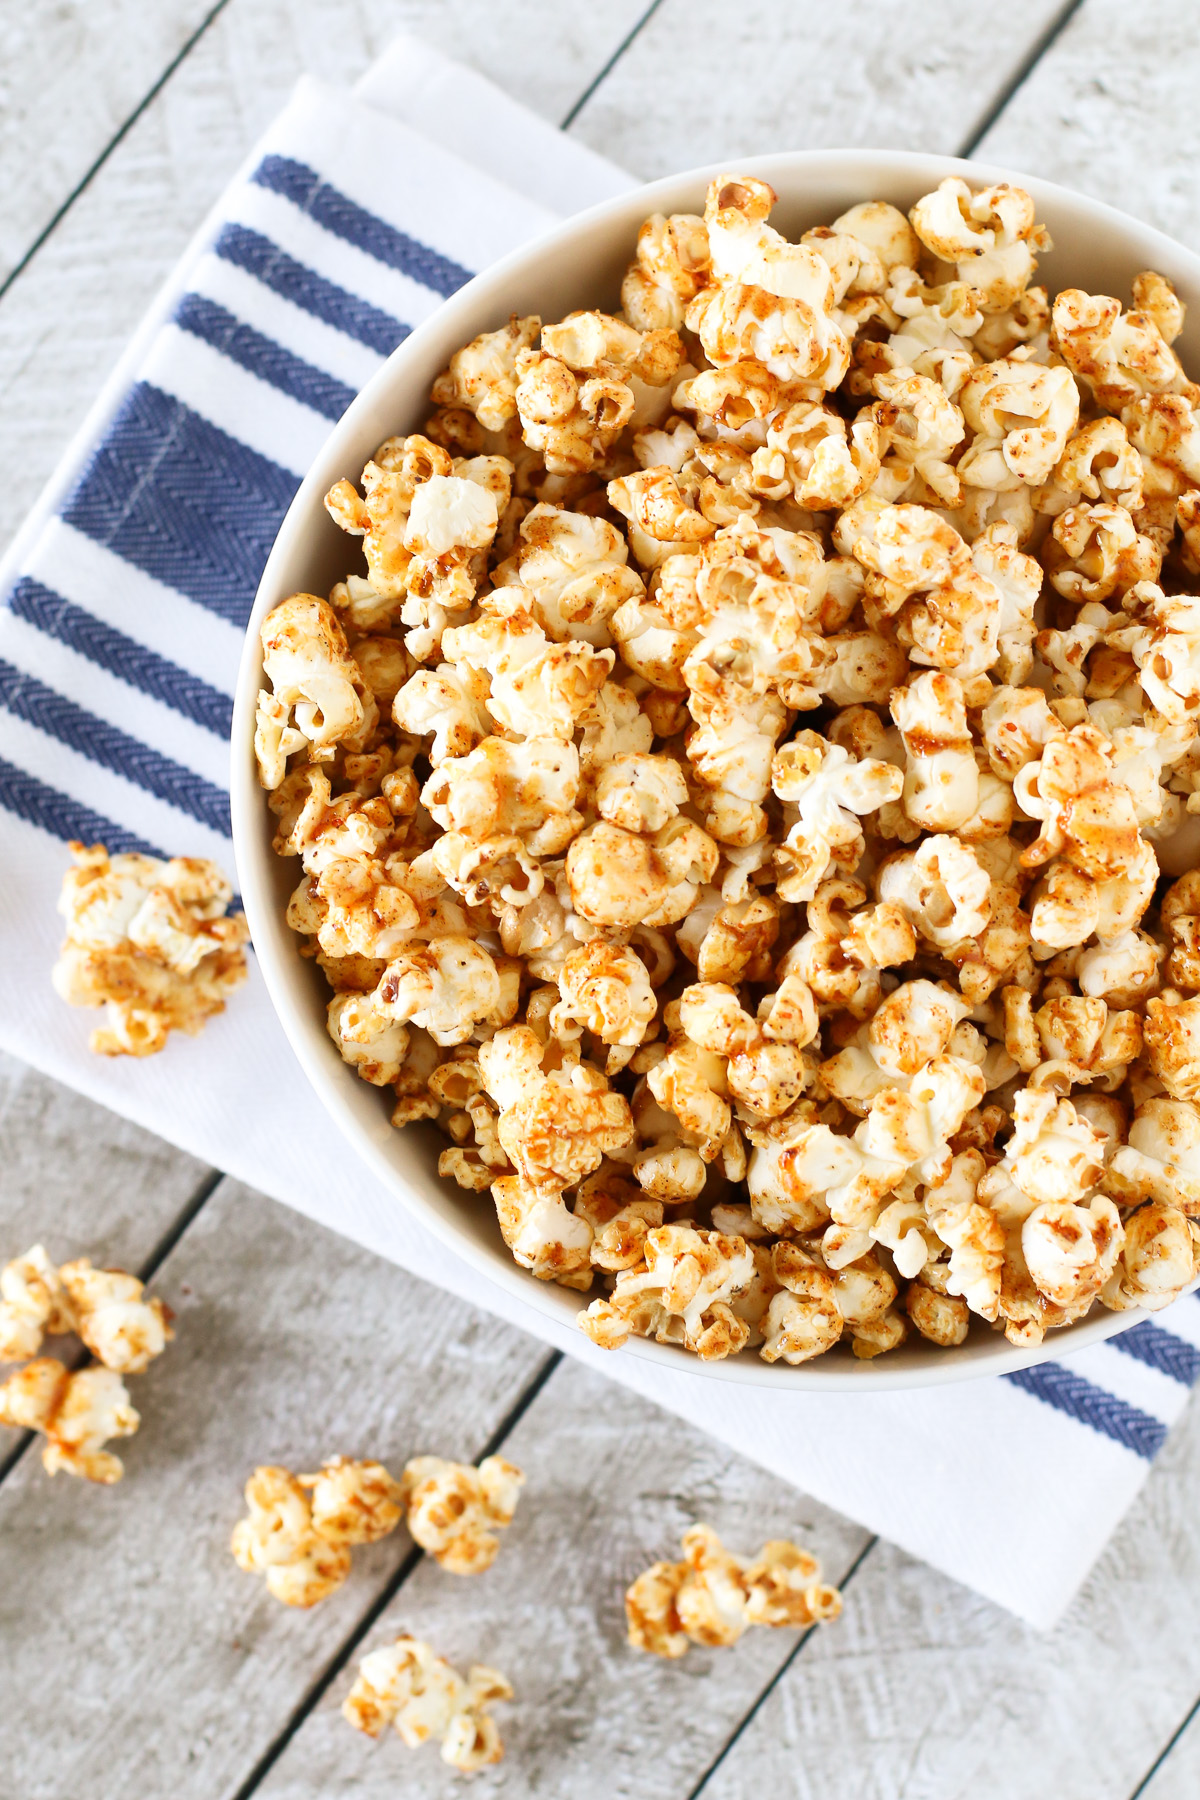 Smokey Maple Popcorn. Made with pure maple syrup, coconut oil and smokey spices, this popcorn is totally addicting!